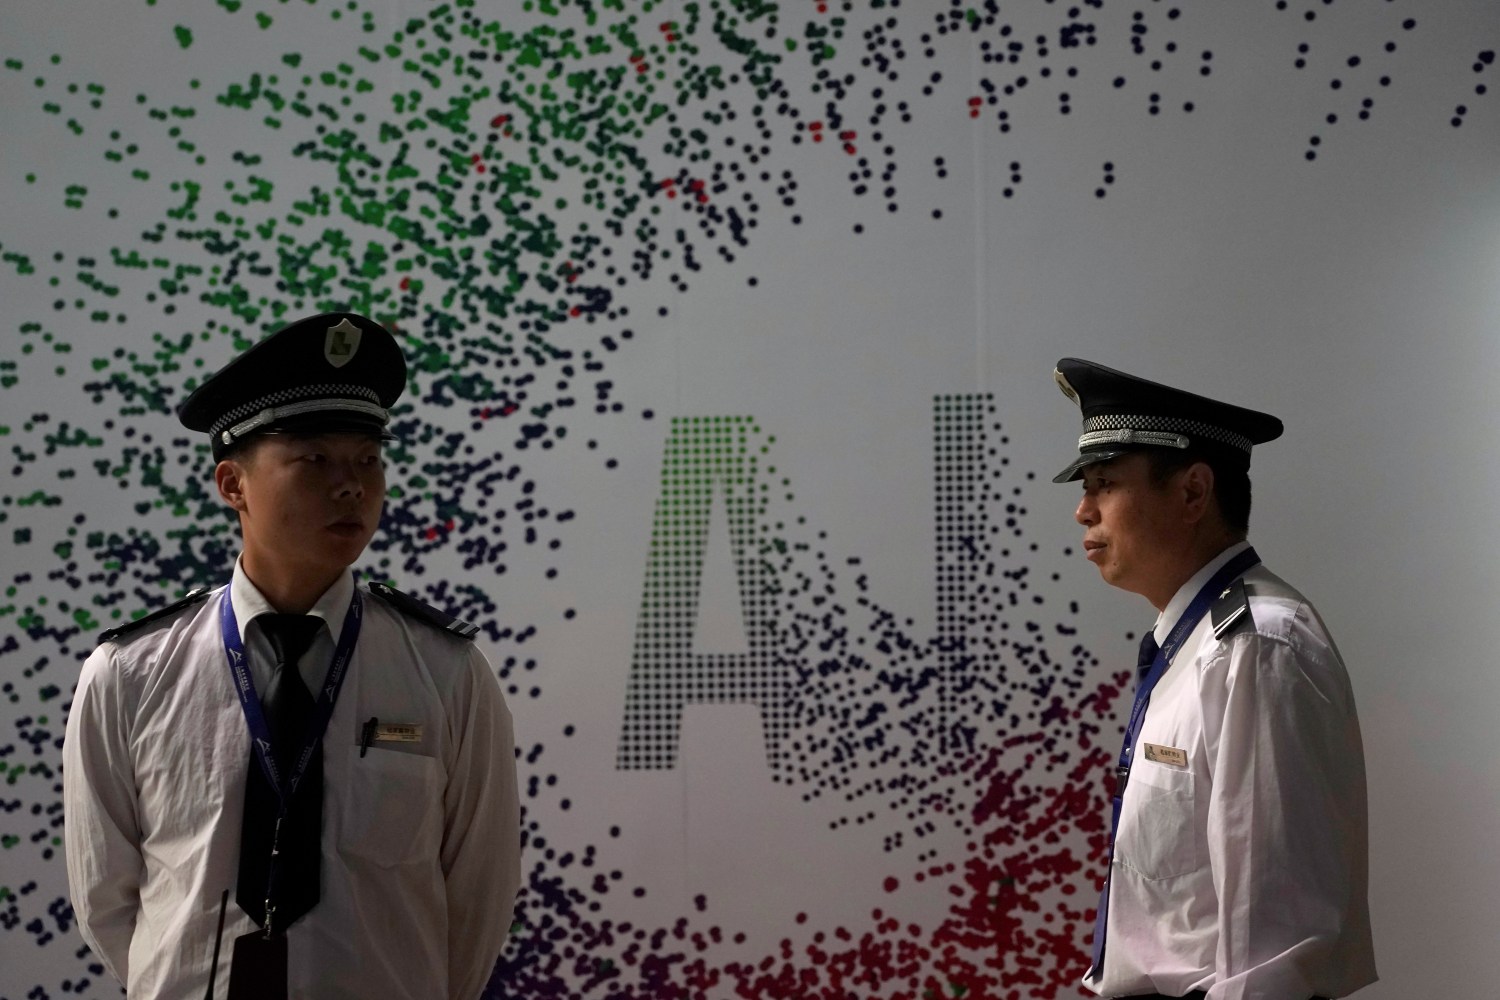 Security officers keep watch in front of an AI (Artificial Intelligence) sign at the annual Huawei Connect event in Shanghai, China September 18, 2019. REUTERS/Aly Song